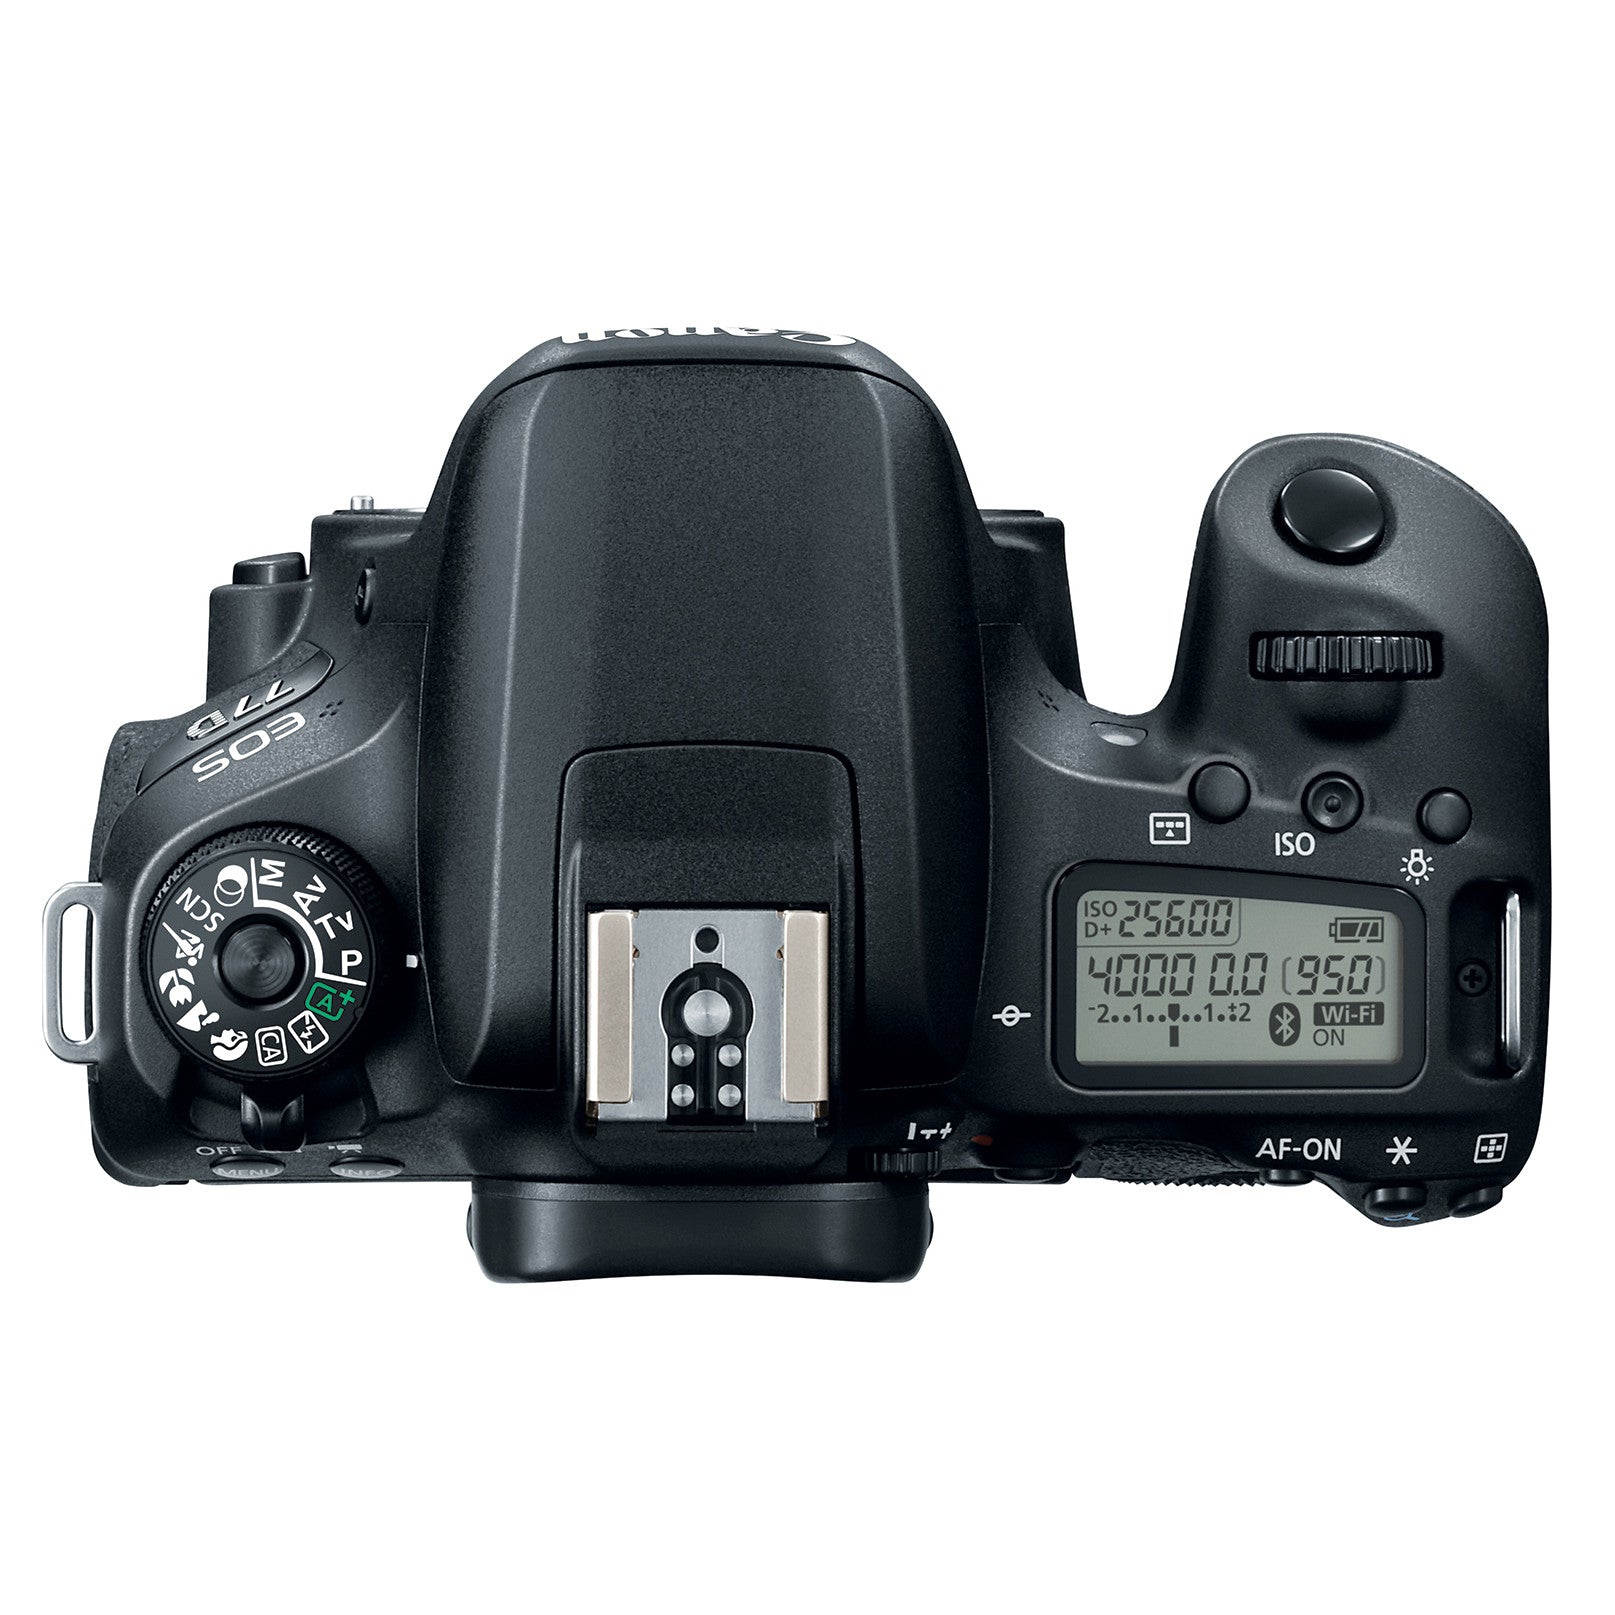 Canon EOS 77D DSLR Camera with 18-55mm IS STM Lens